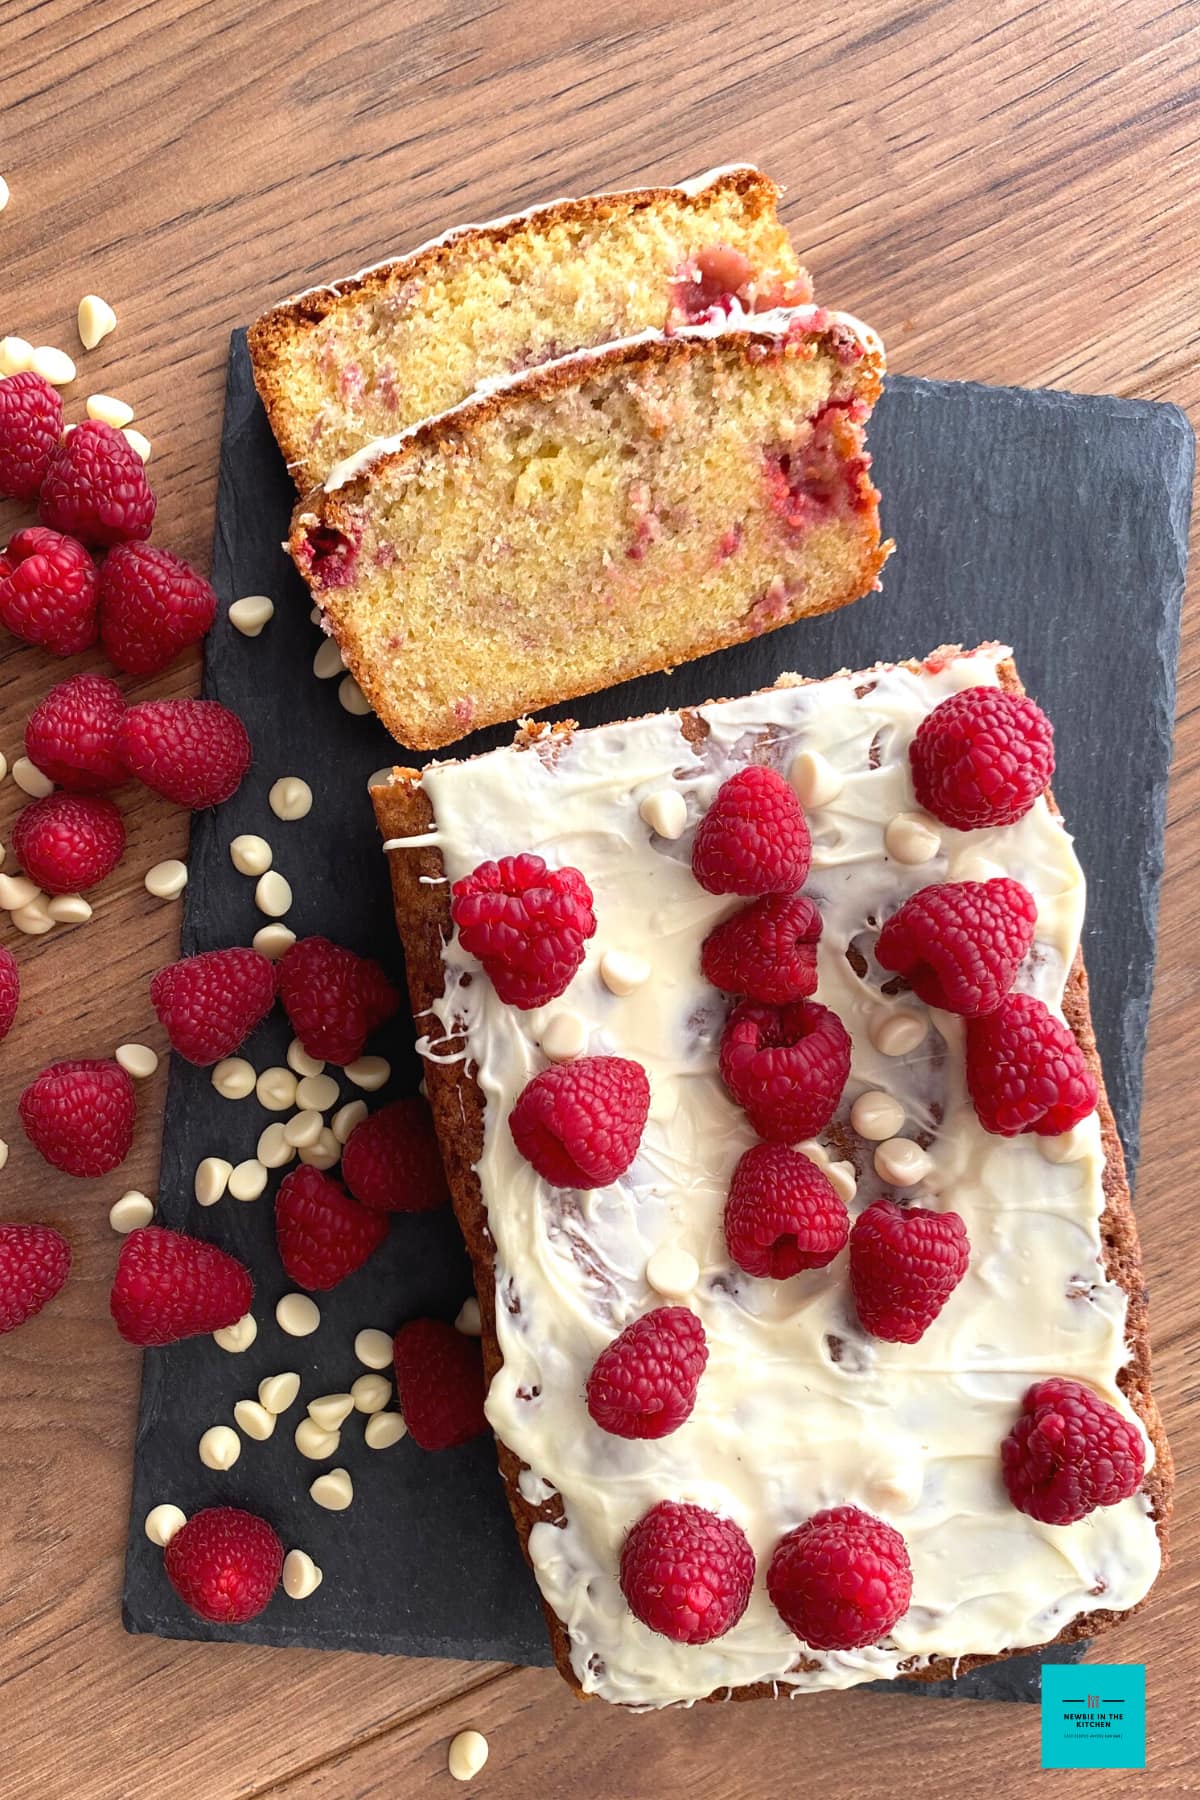 Easy Raspberry Pound Cake. A delicious classic pound cake recipe bursting with fresh raspberries. Soft, moist and tangy sweet. Topped with a simple chocolate topping. Easy to follow instructions